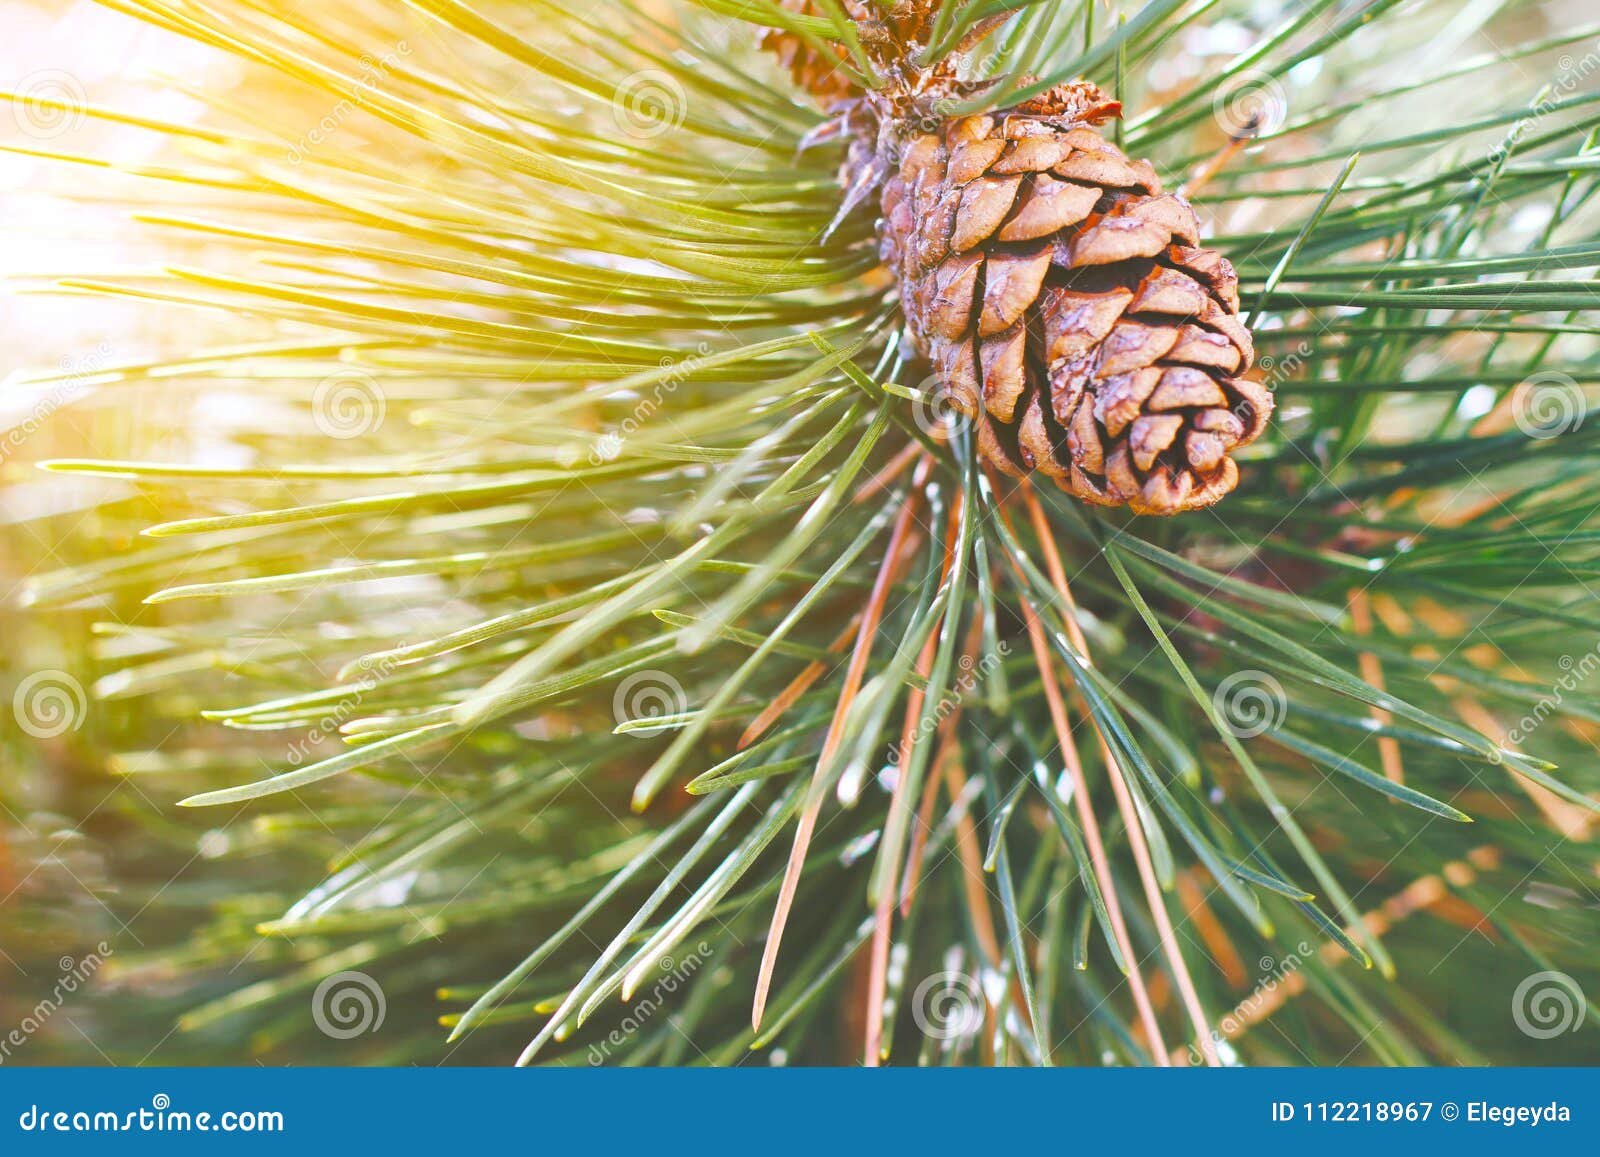 Pine Cone on the Tree Branch Stock Image - Image of pattern, nature ...